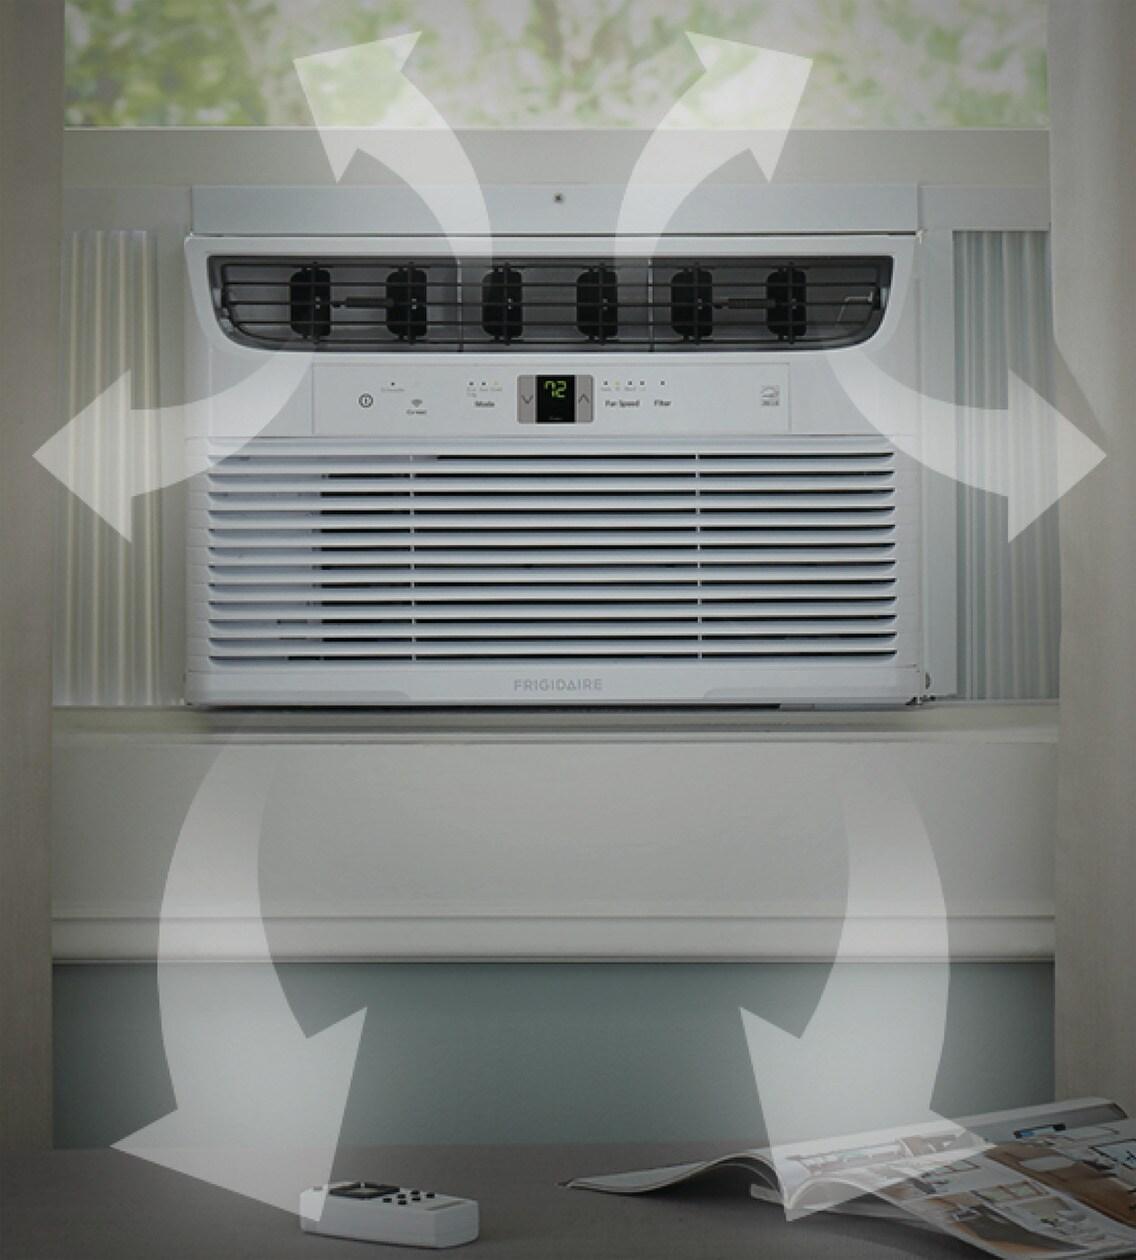 Frigidaire&nbsp;8,000 BTU Connected Window-Mounted Room Air Conditioner - image 4 of 6